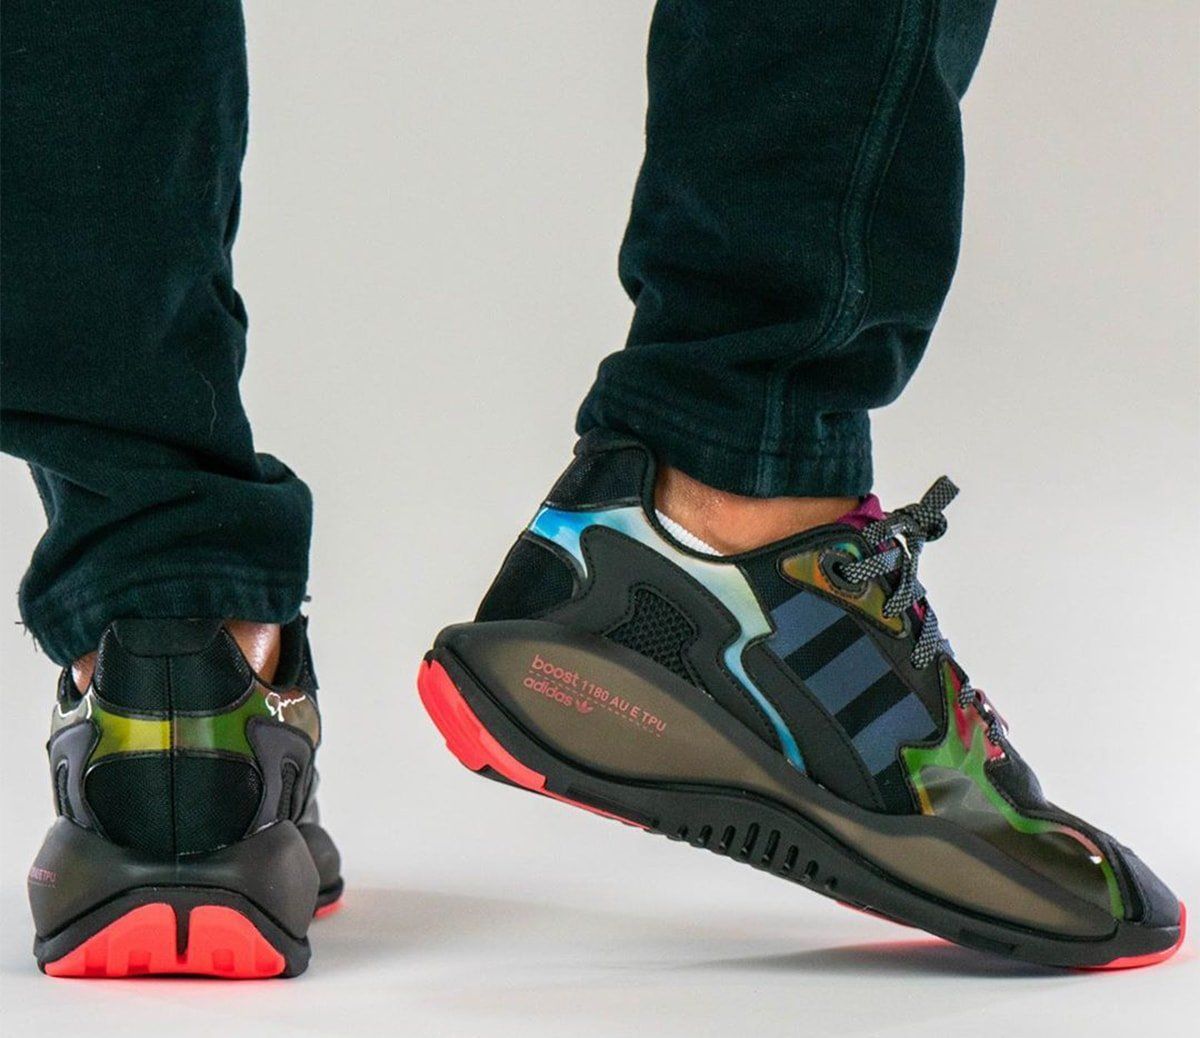 The atmos x adidas ZX Alkyne "Neo Tokyo" Arrives September 18th | HOUSE